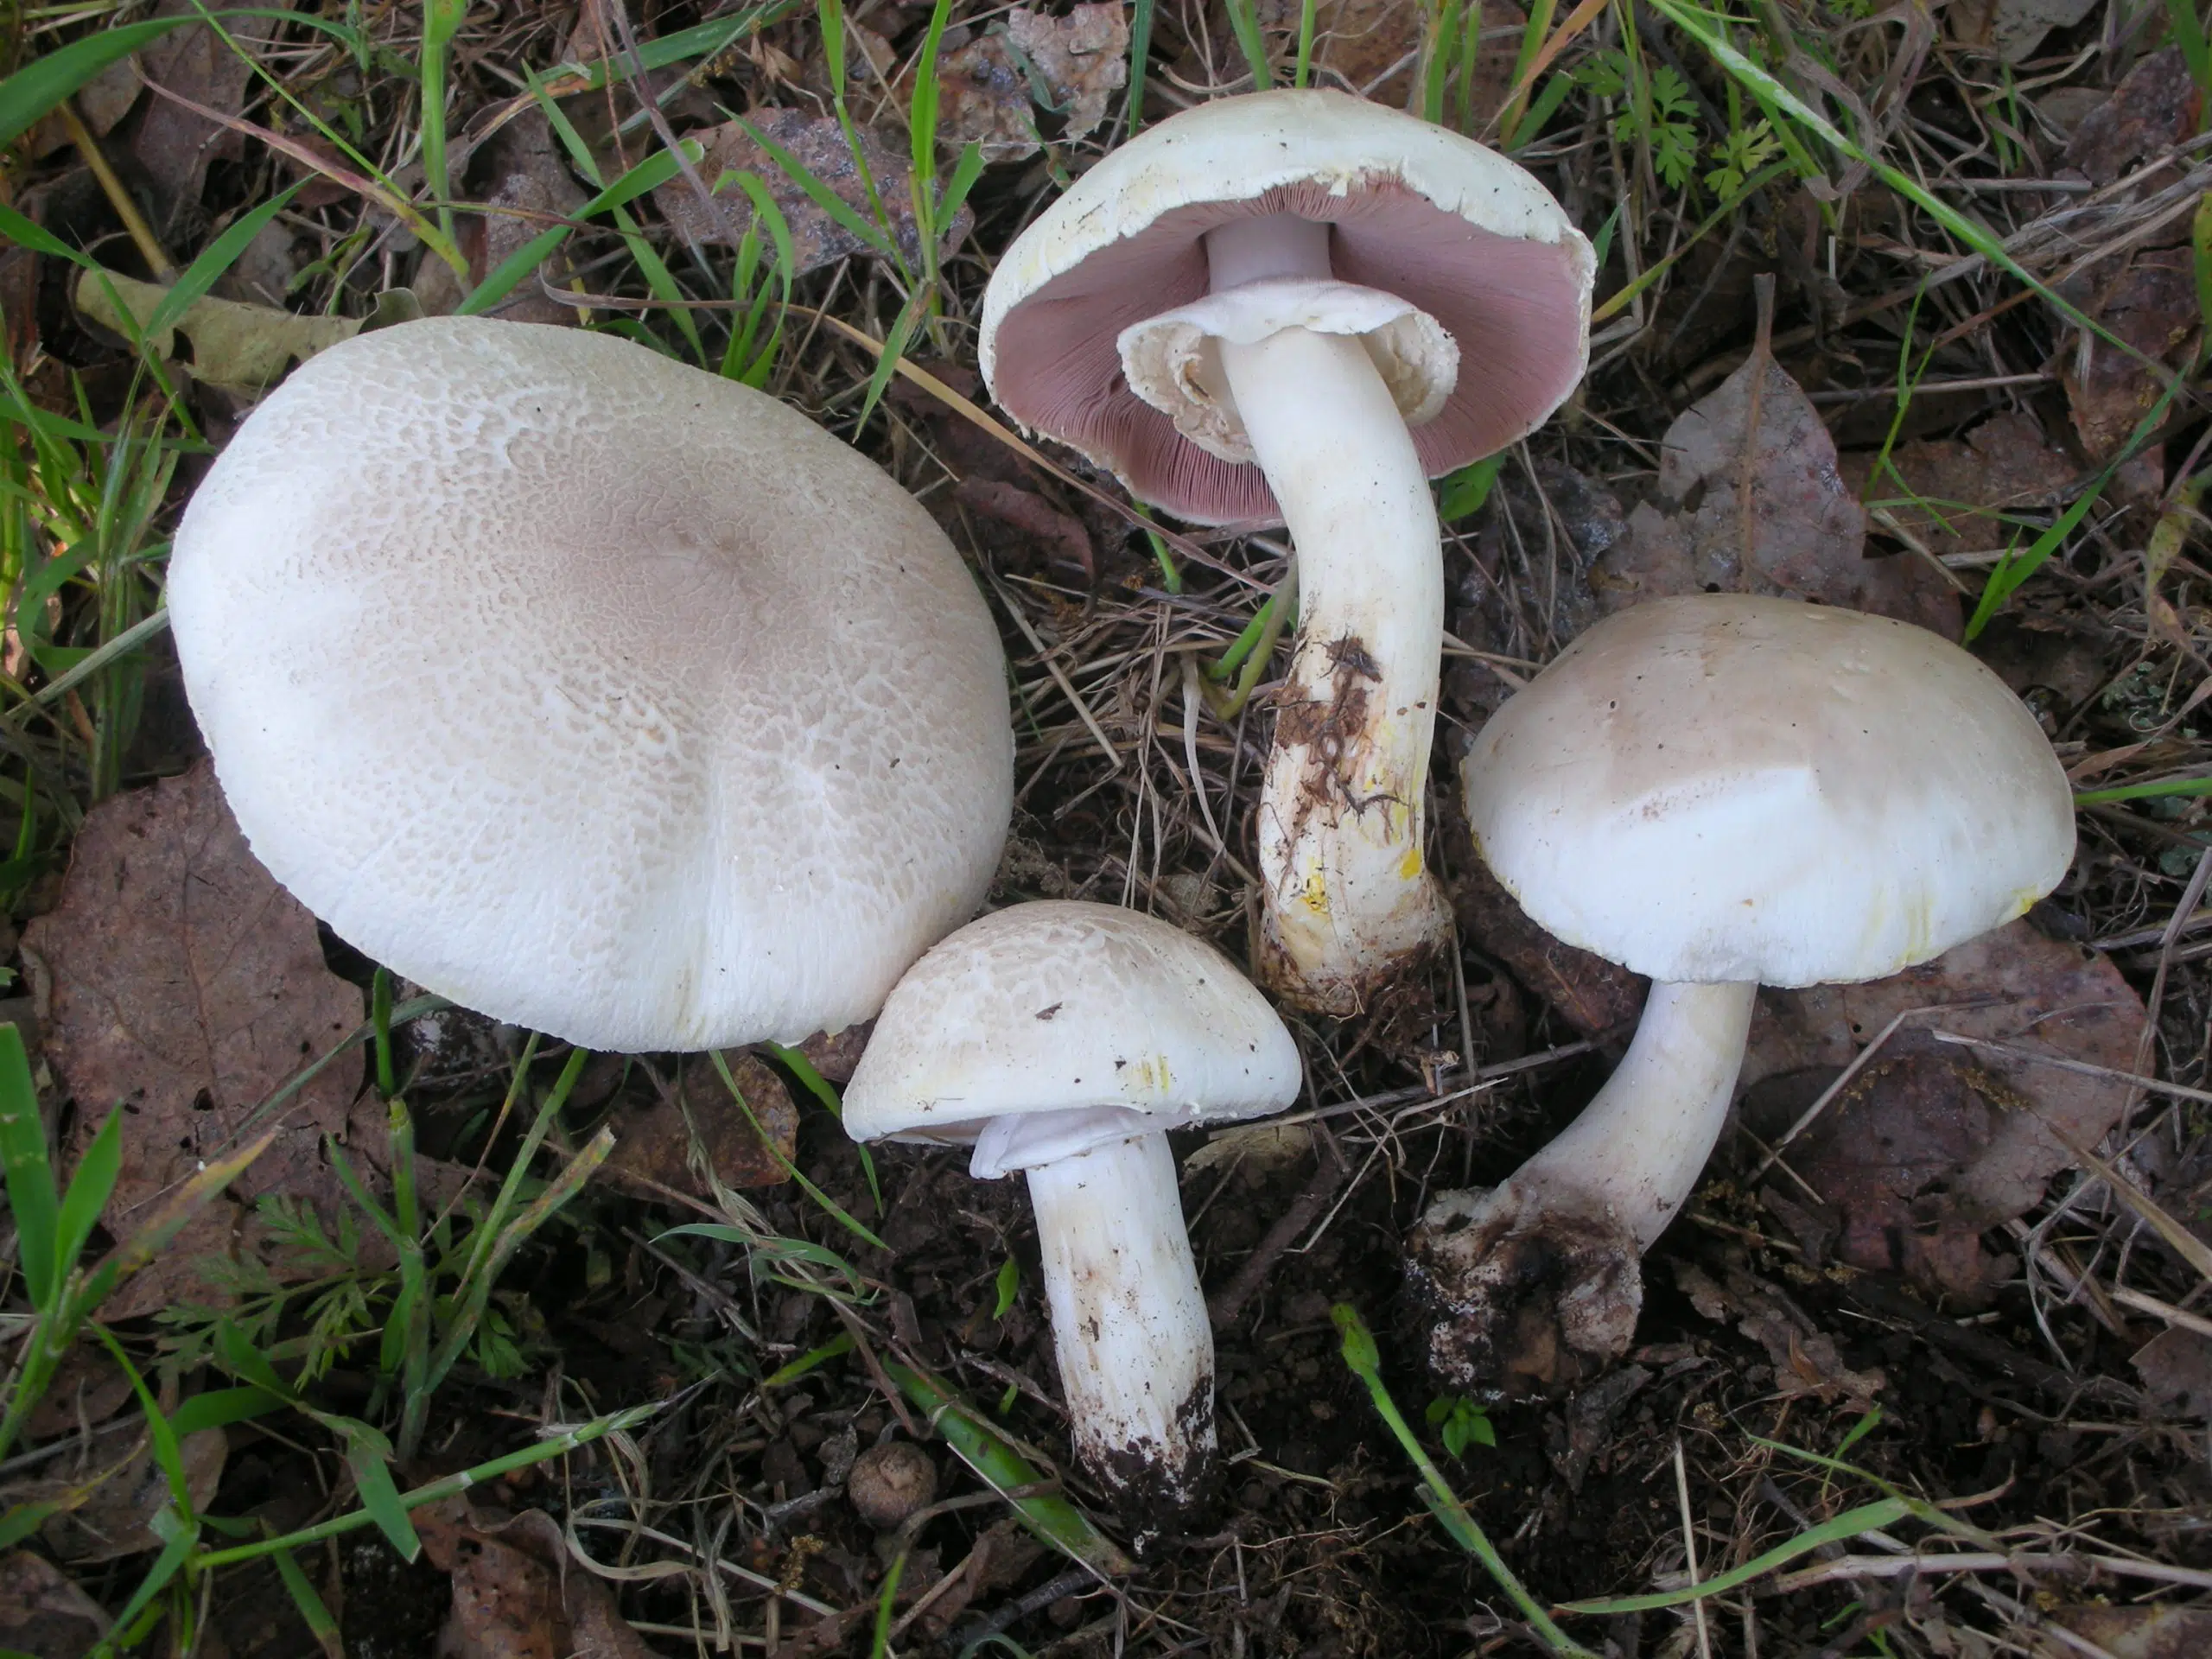 Keep your dog safe from poisonous mushrooms & toxic plants